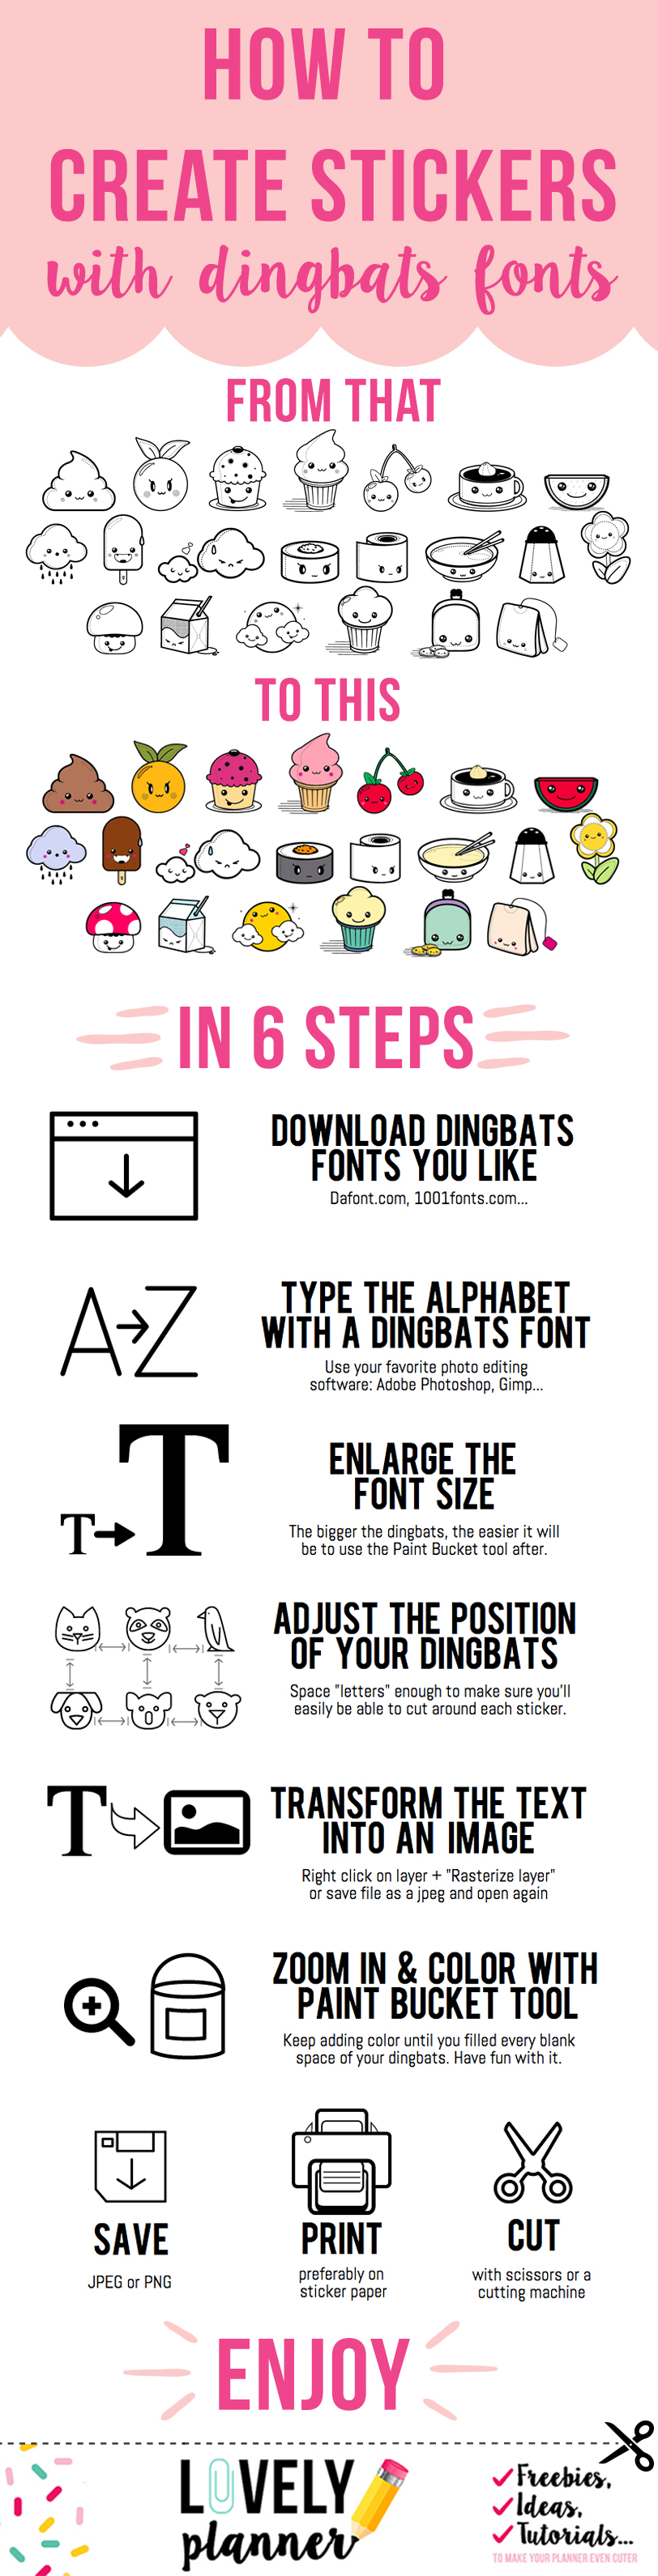 infographic how to create stickers with dingbats font - Lovely Planner